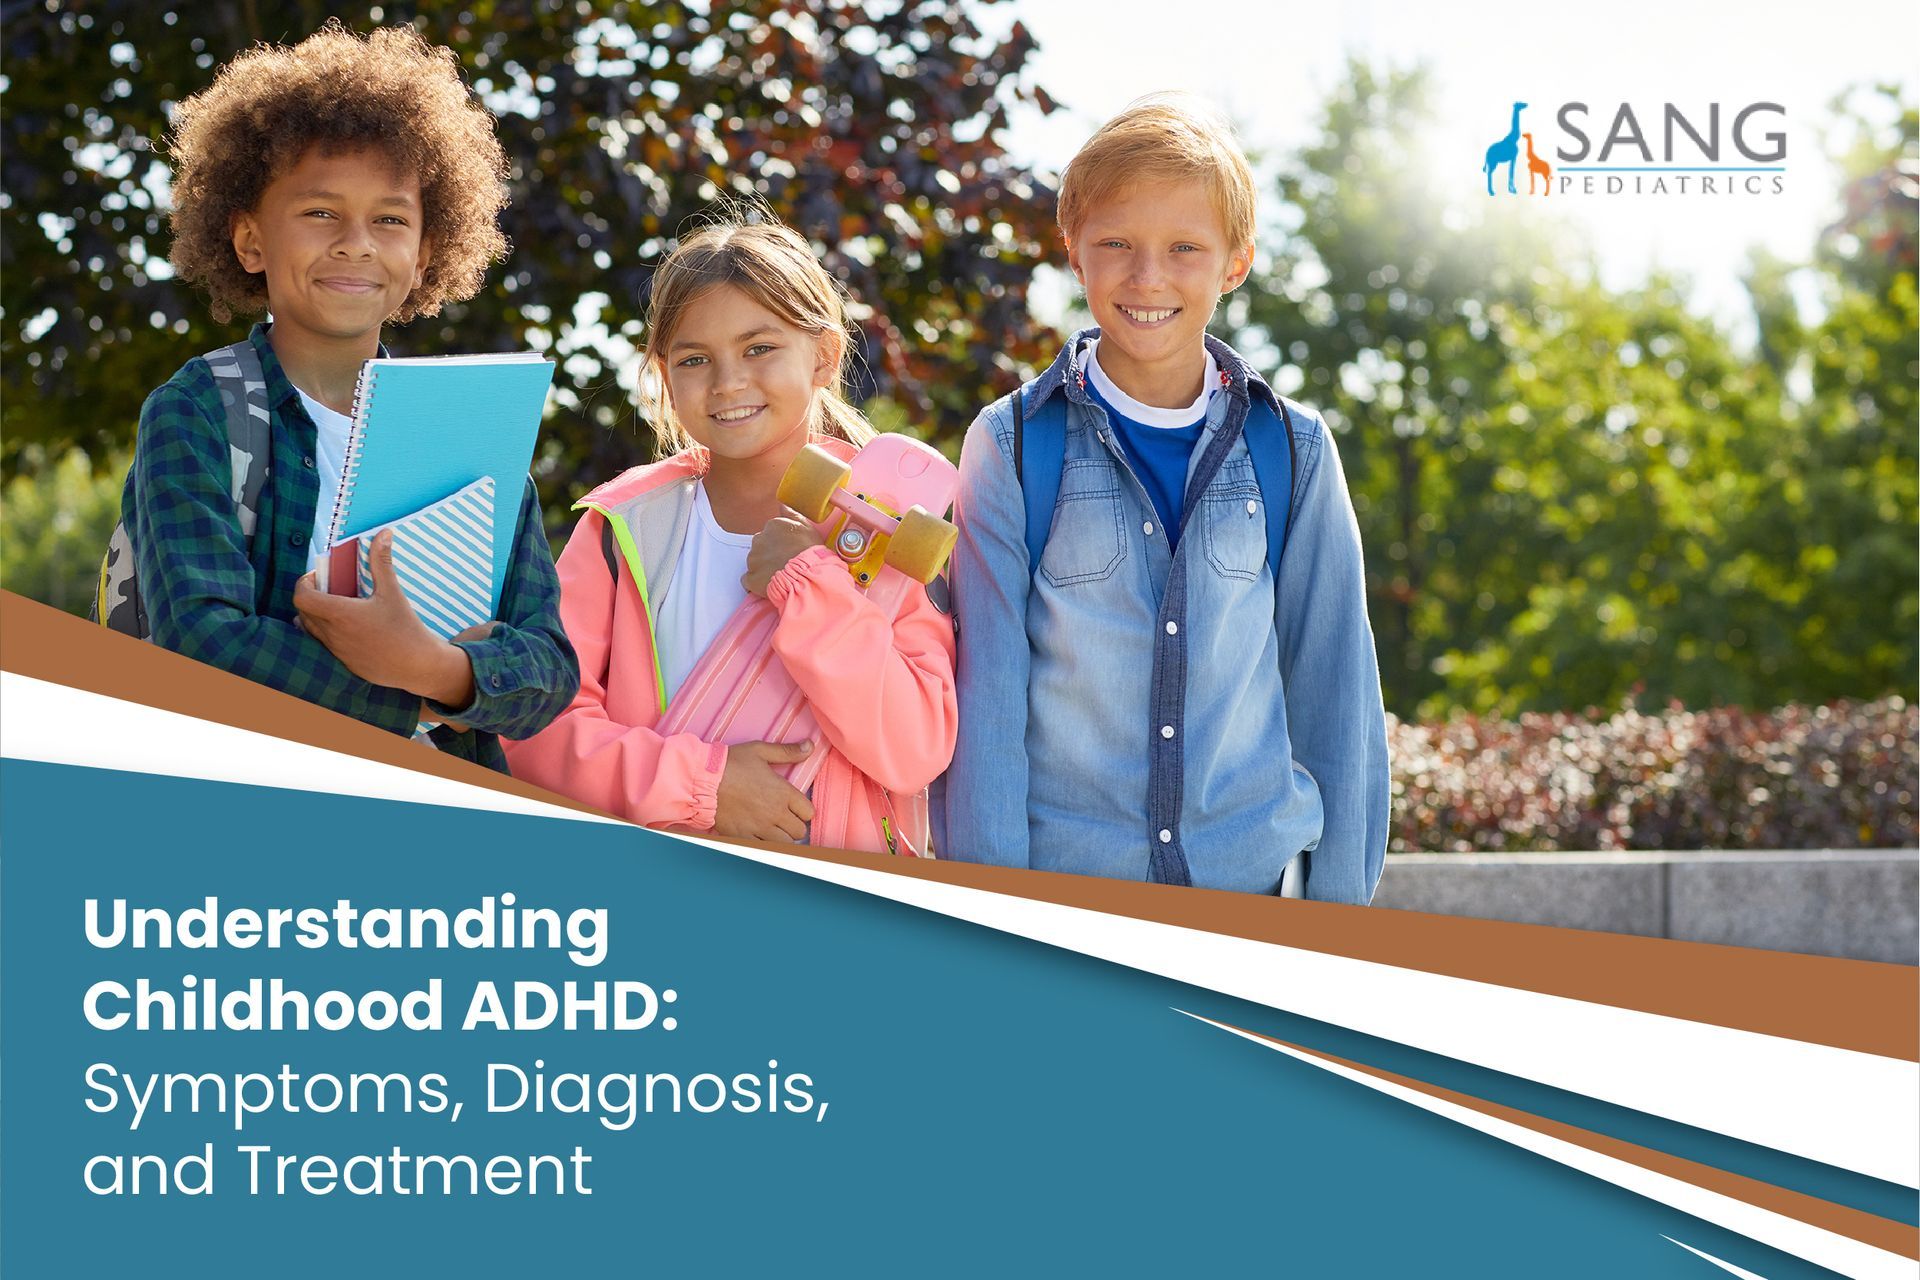 Understanding Childhood ADHD: Symptoms, Diagnosis, and Treatment